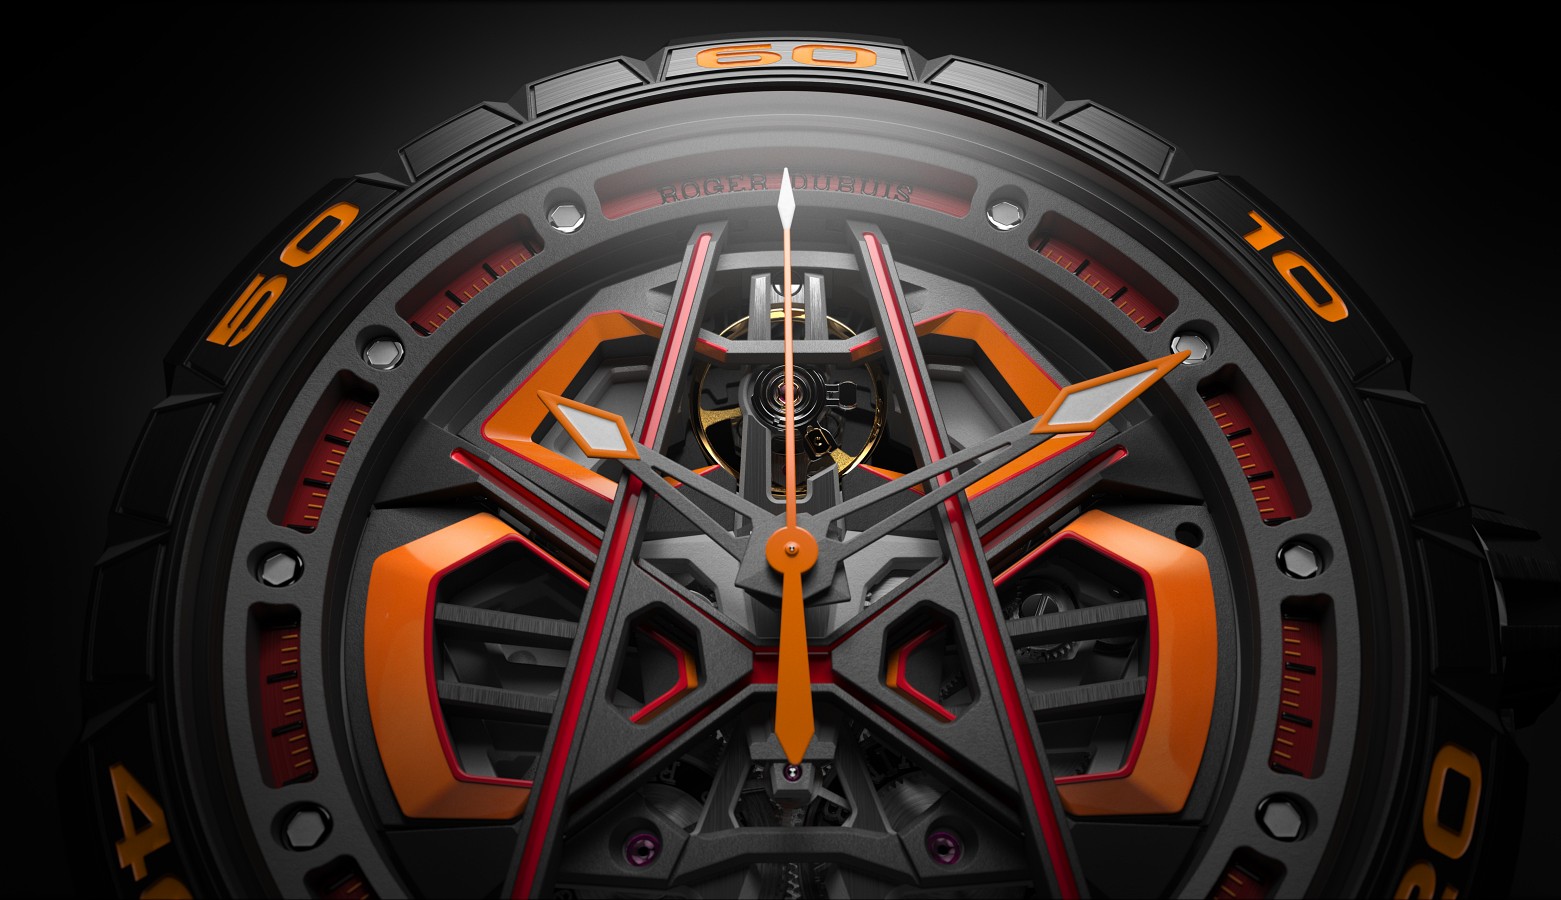 Roger Dubuis Excalibur Spider Huracán Sterrato MB